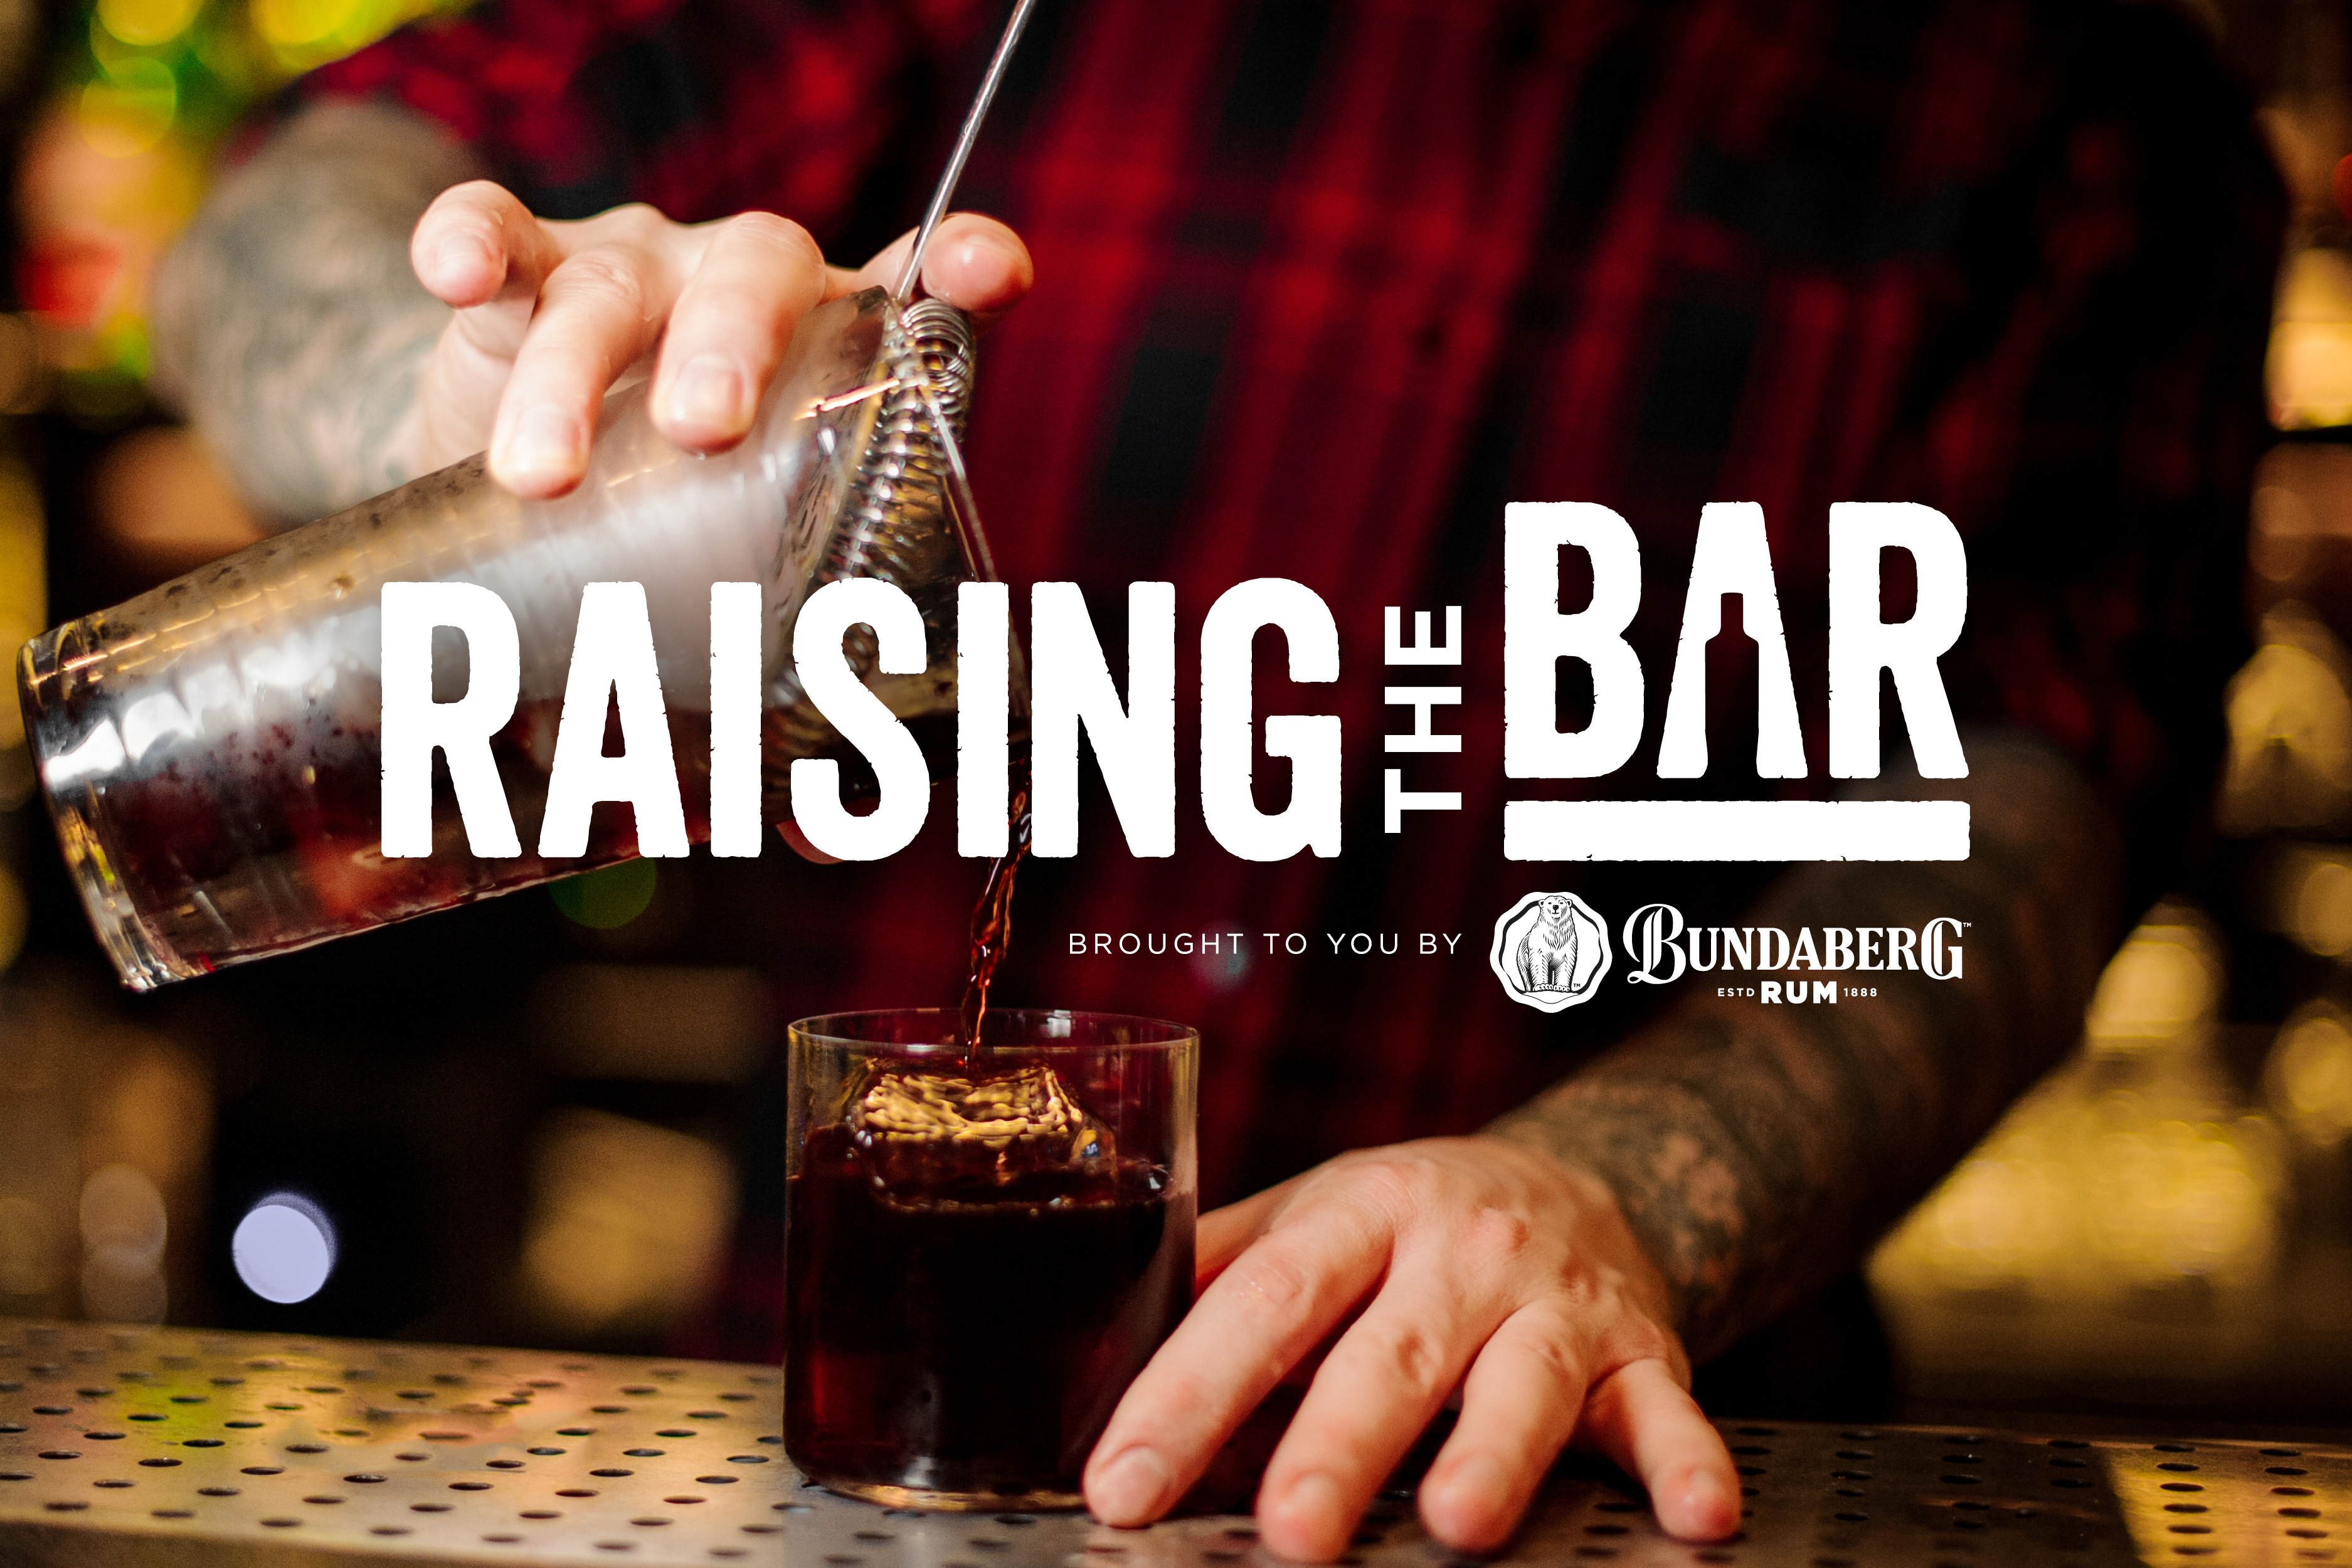 Applications now open for support through Bundaberg Rum’s Raising the Bar